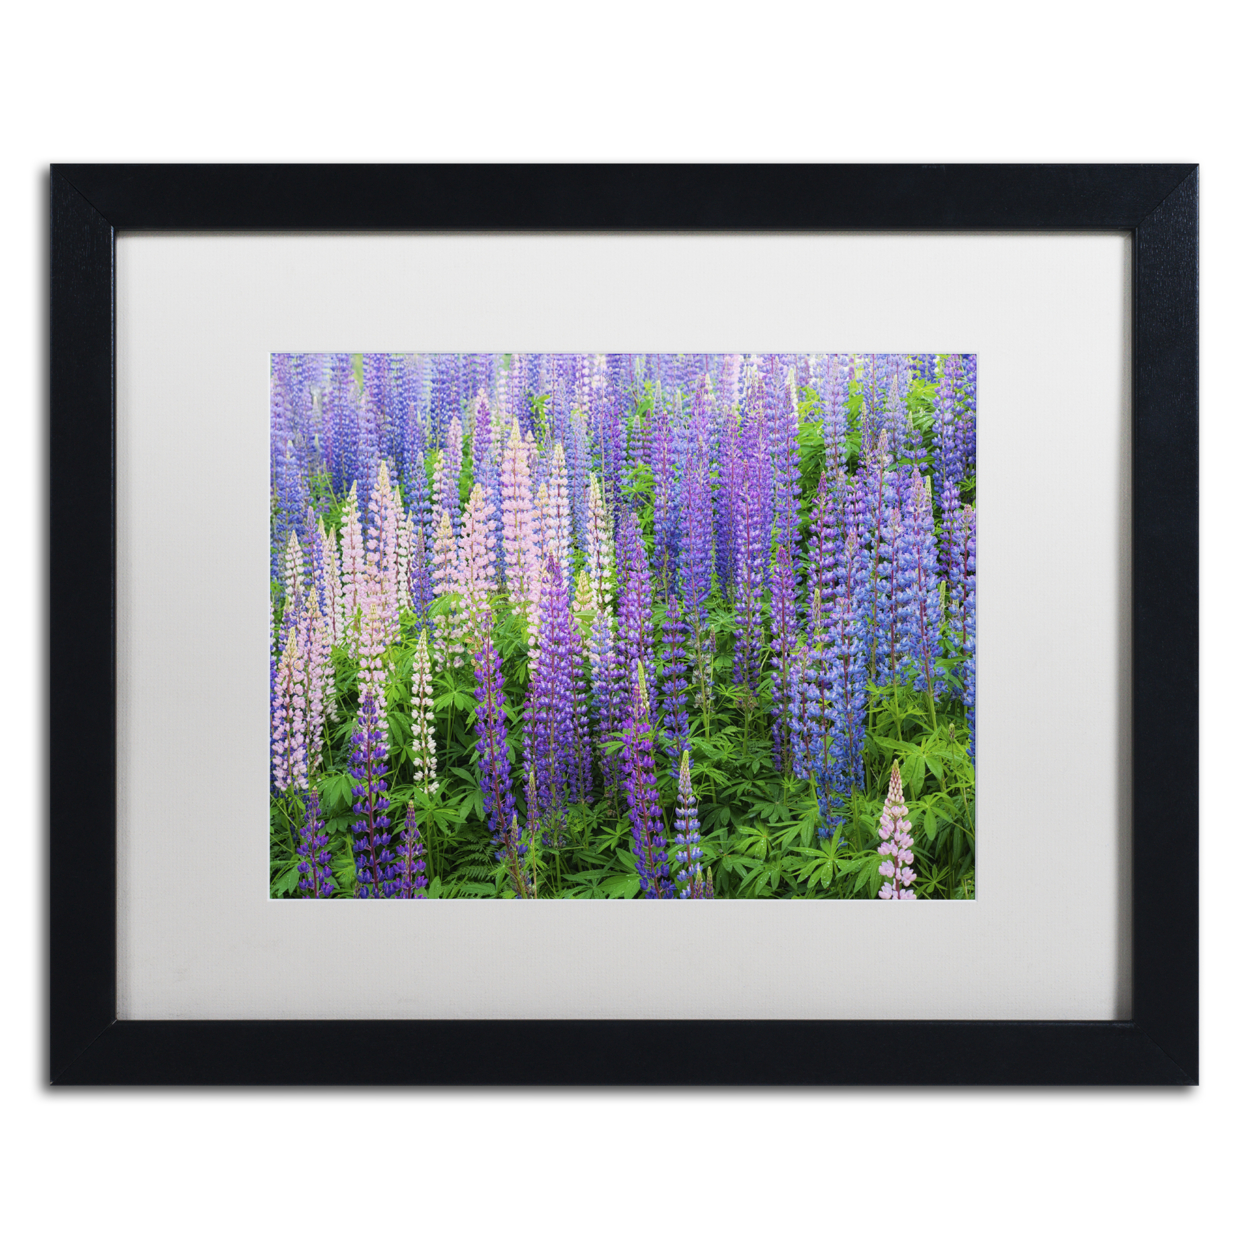 Cora Niele 'Blue Pink Lupine Flower Field' Black Wooden Framed Art 18 X 22 Inches